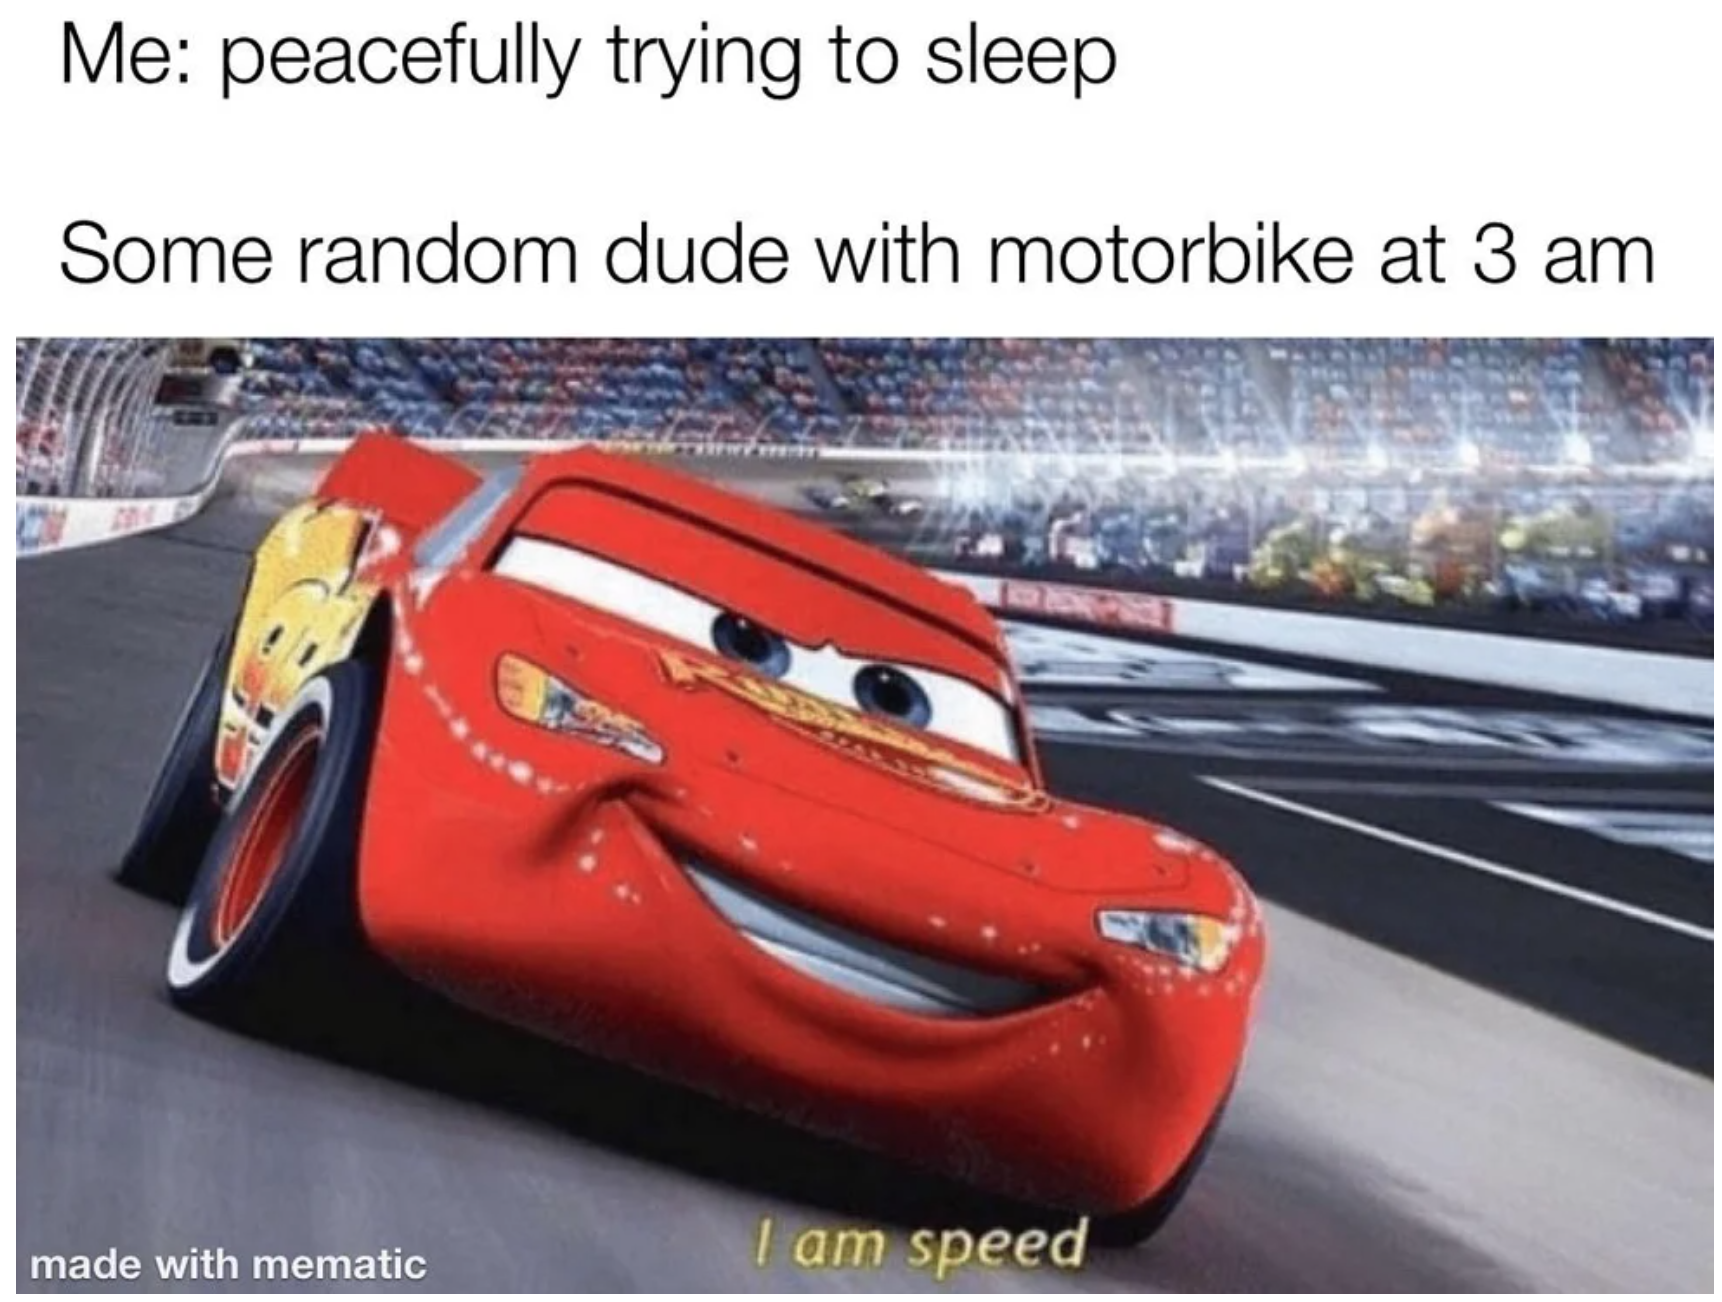 reddit sbeve meme - Me peacefully trying to sleep Some random dude with motorbike at 3 am made with mematic I am speed